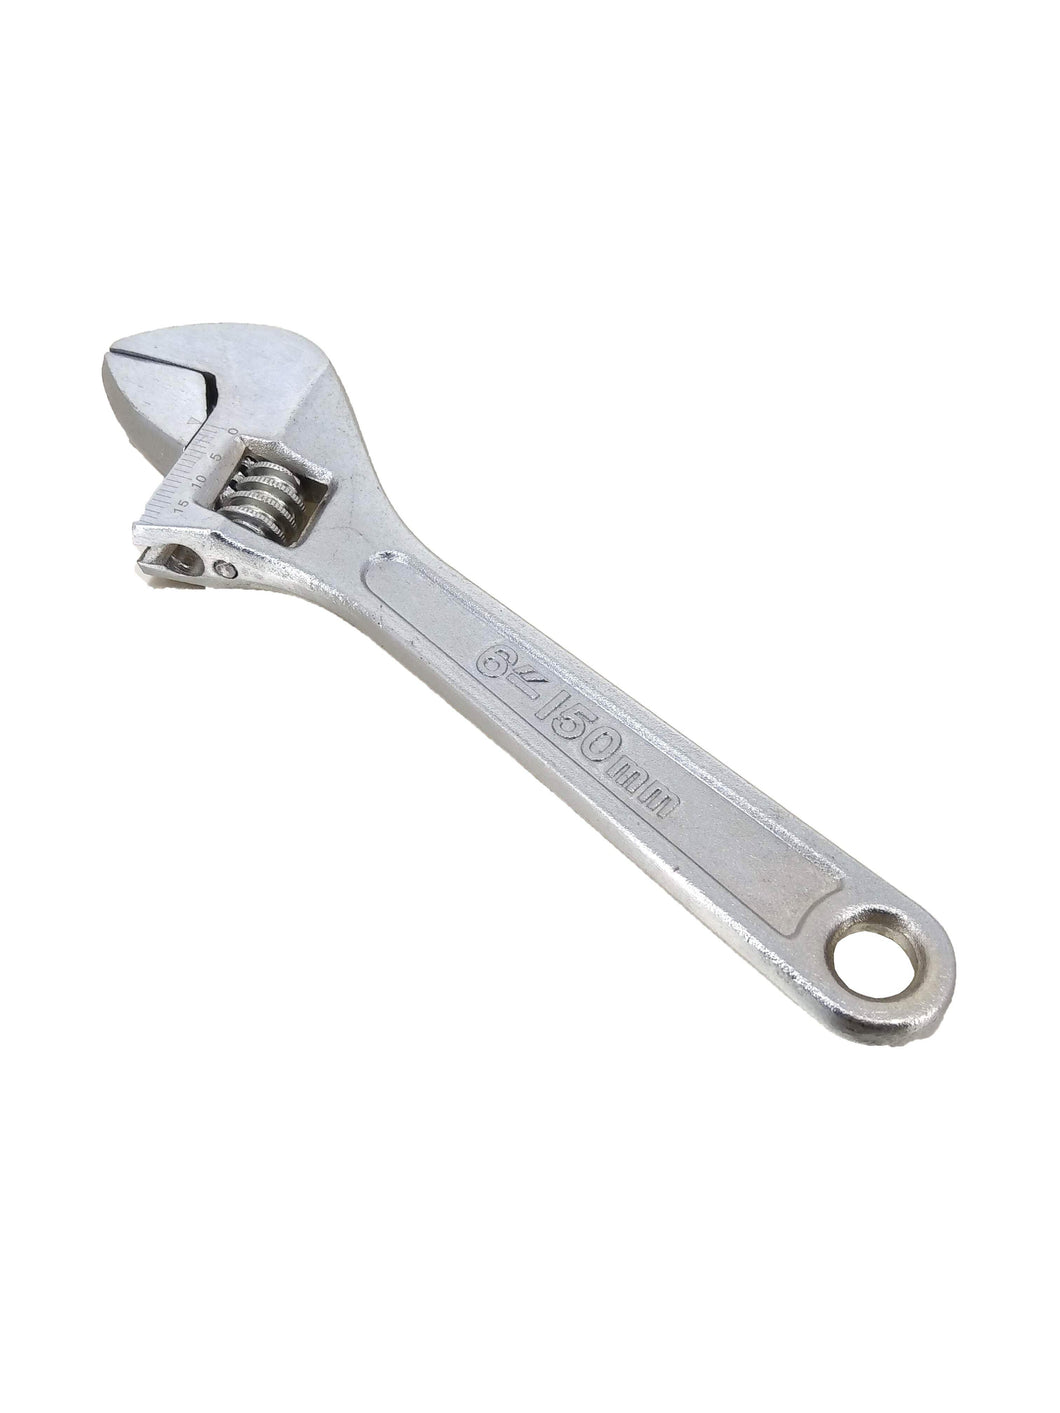 6 Inch Adjustable Wrench hk